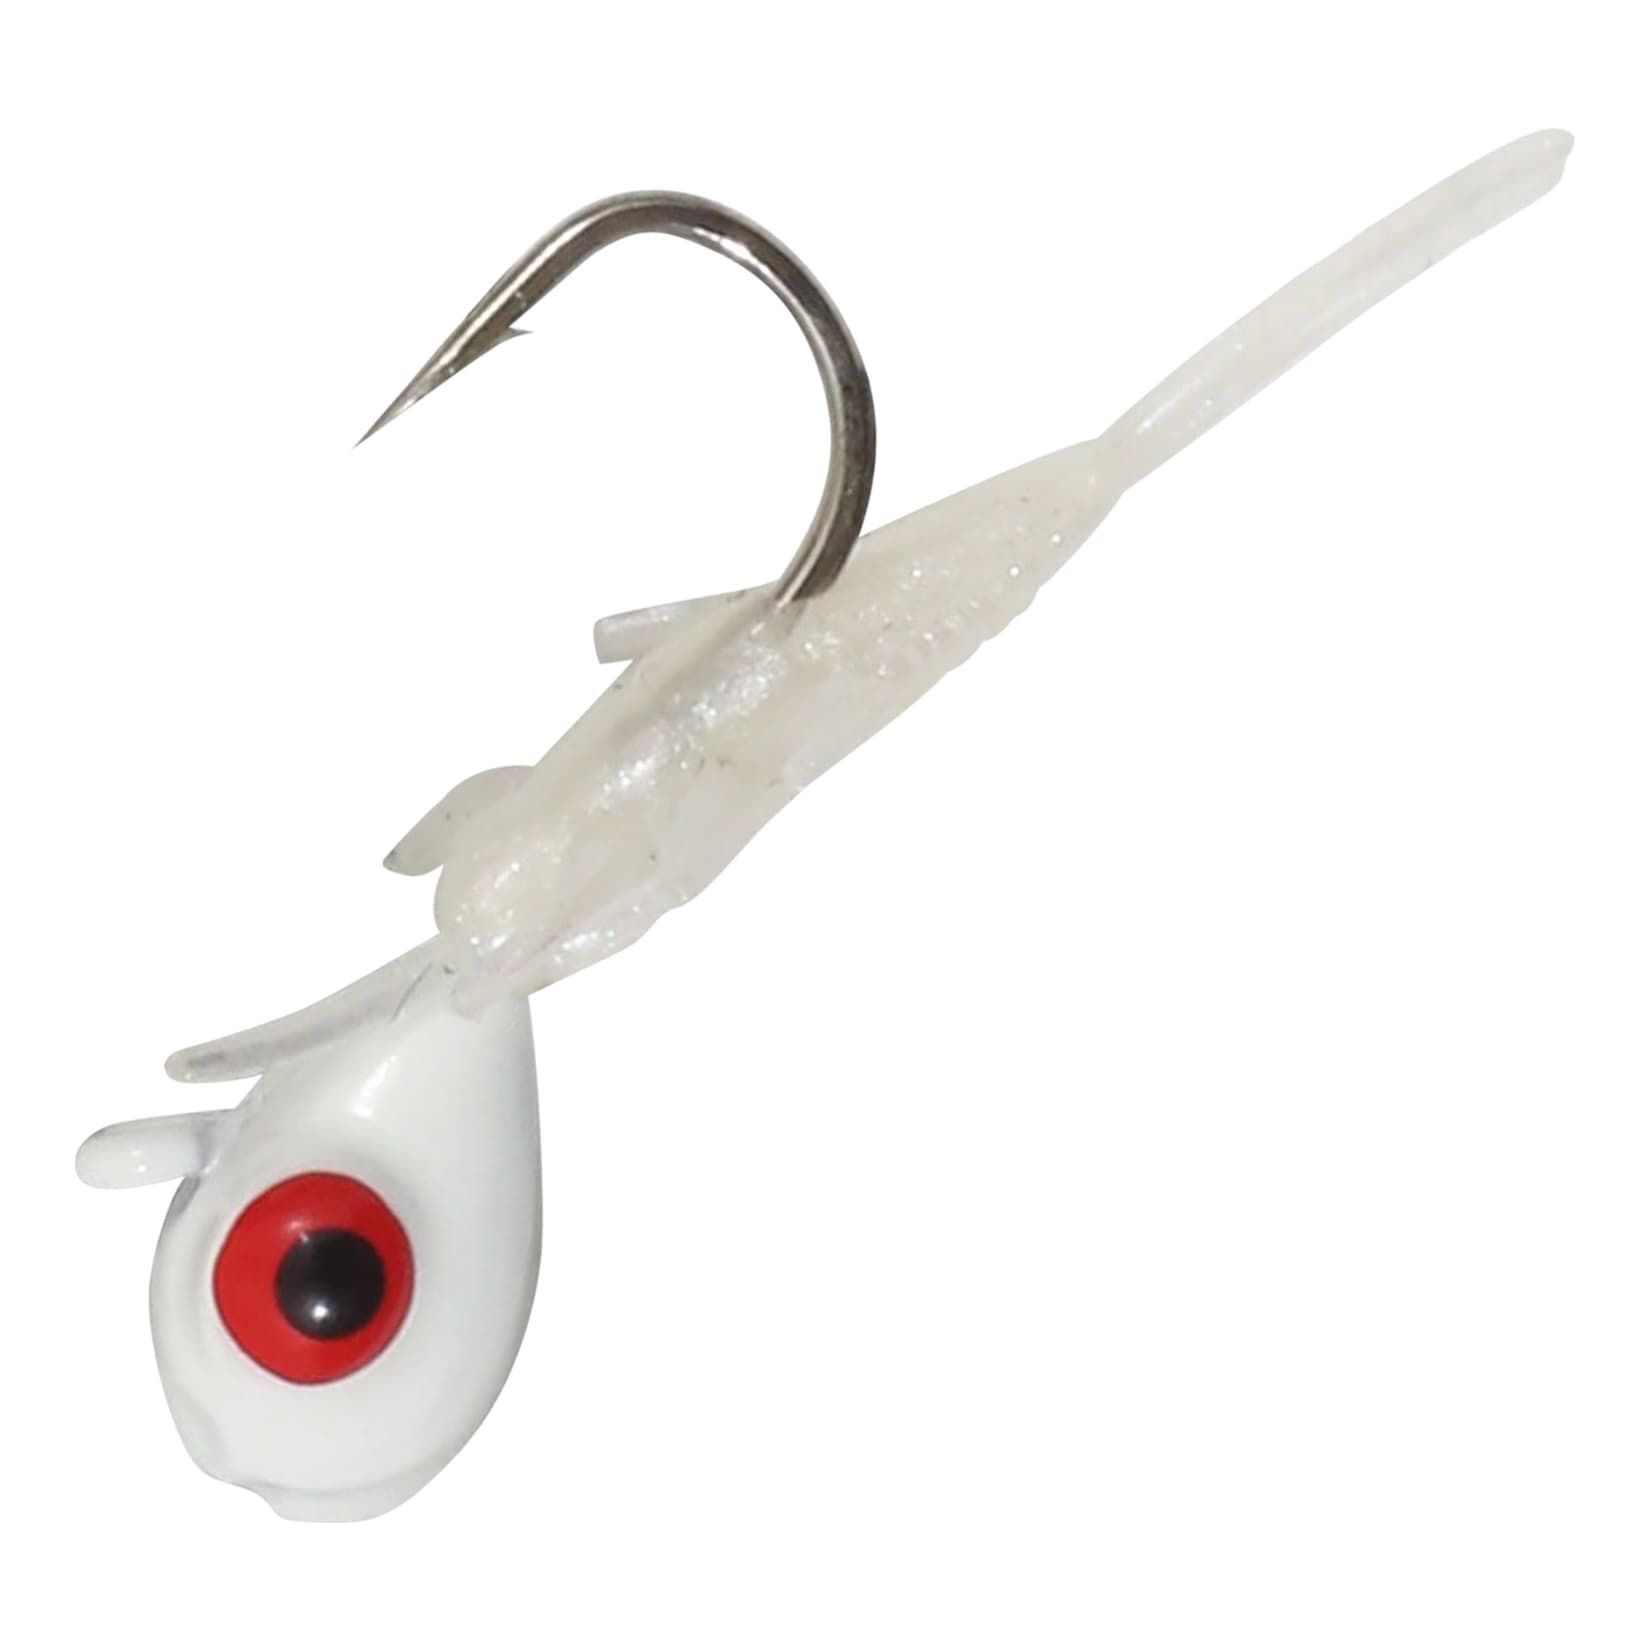 Northland Fishing Tackle Tungsten Mayfly Jig